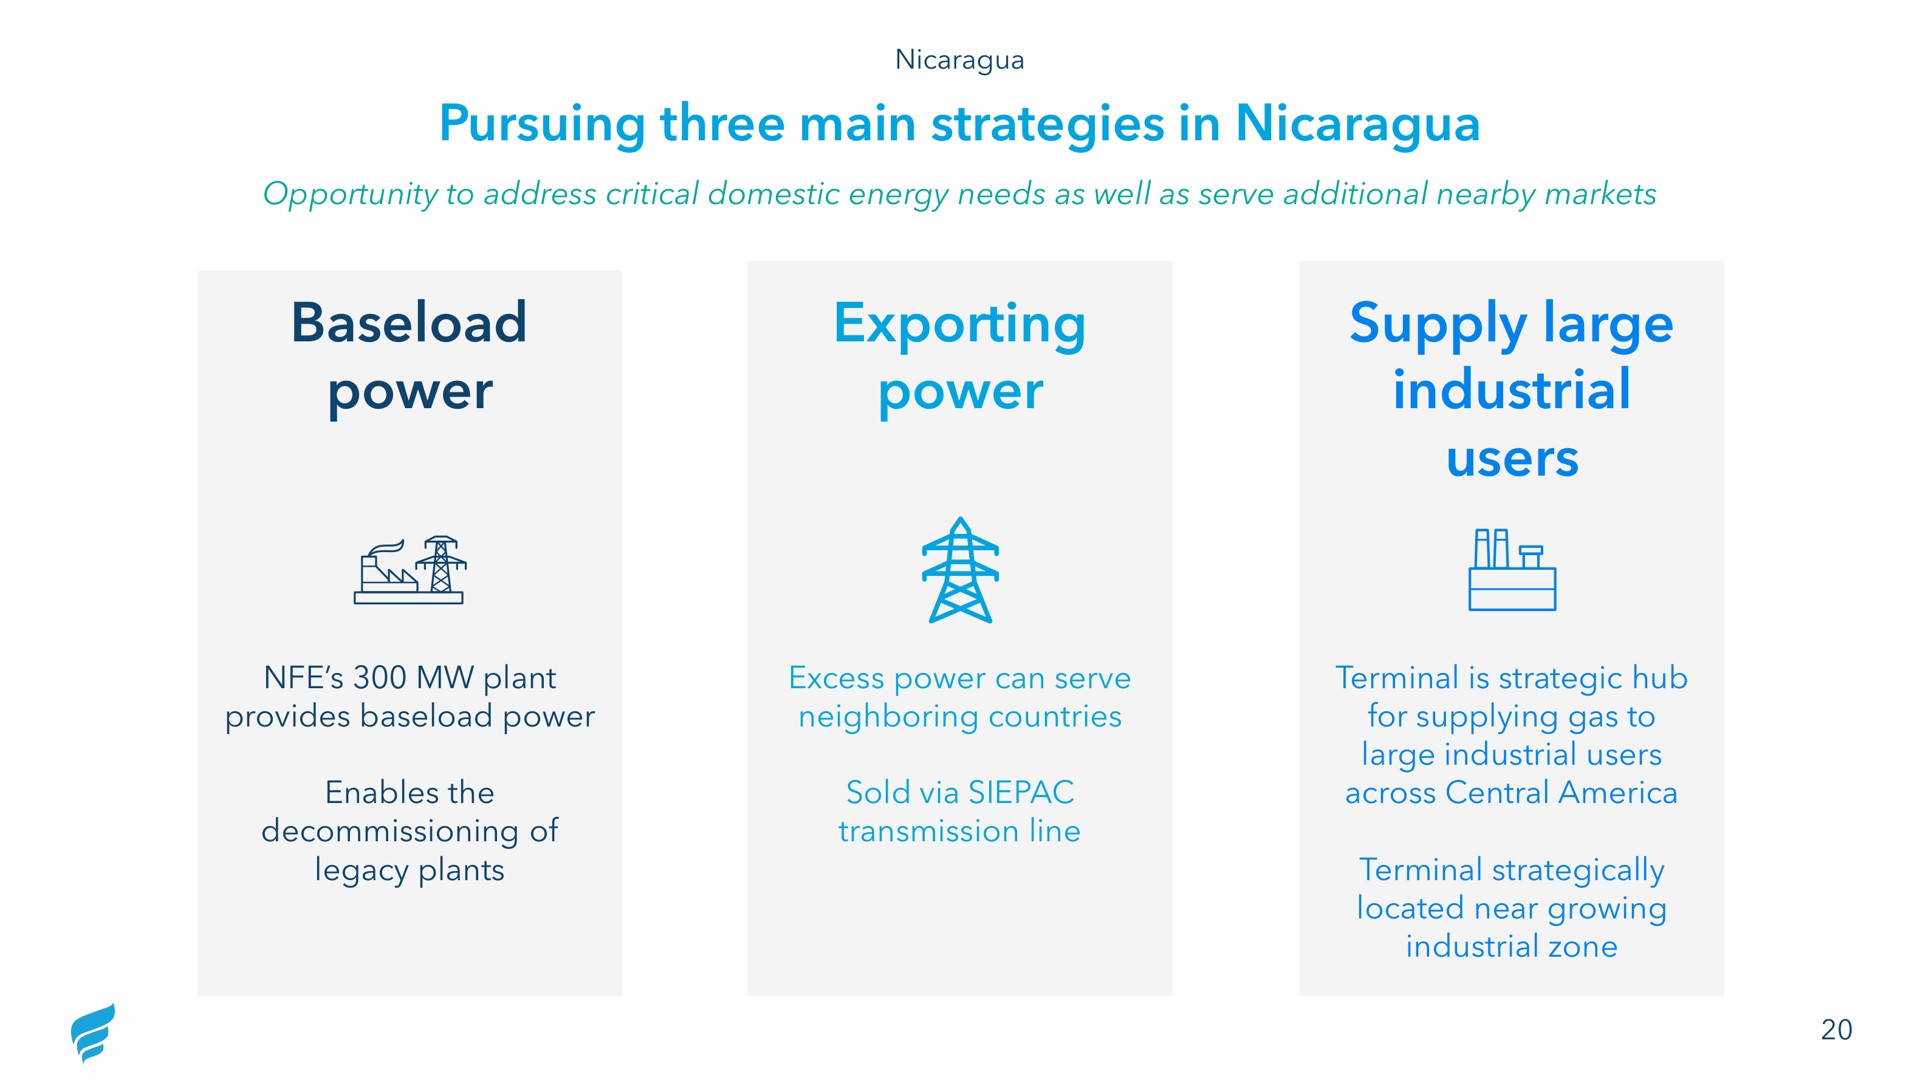 pursuing three main strategies in power exporting power supply large industrial users a | NewFortress Energy